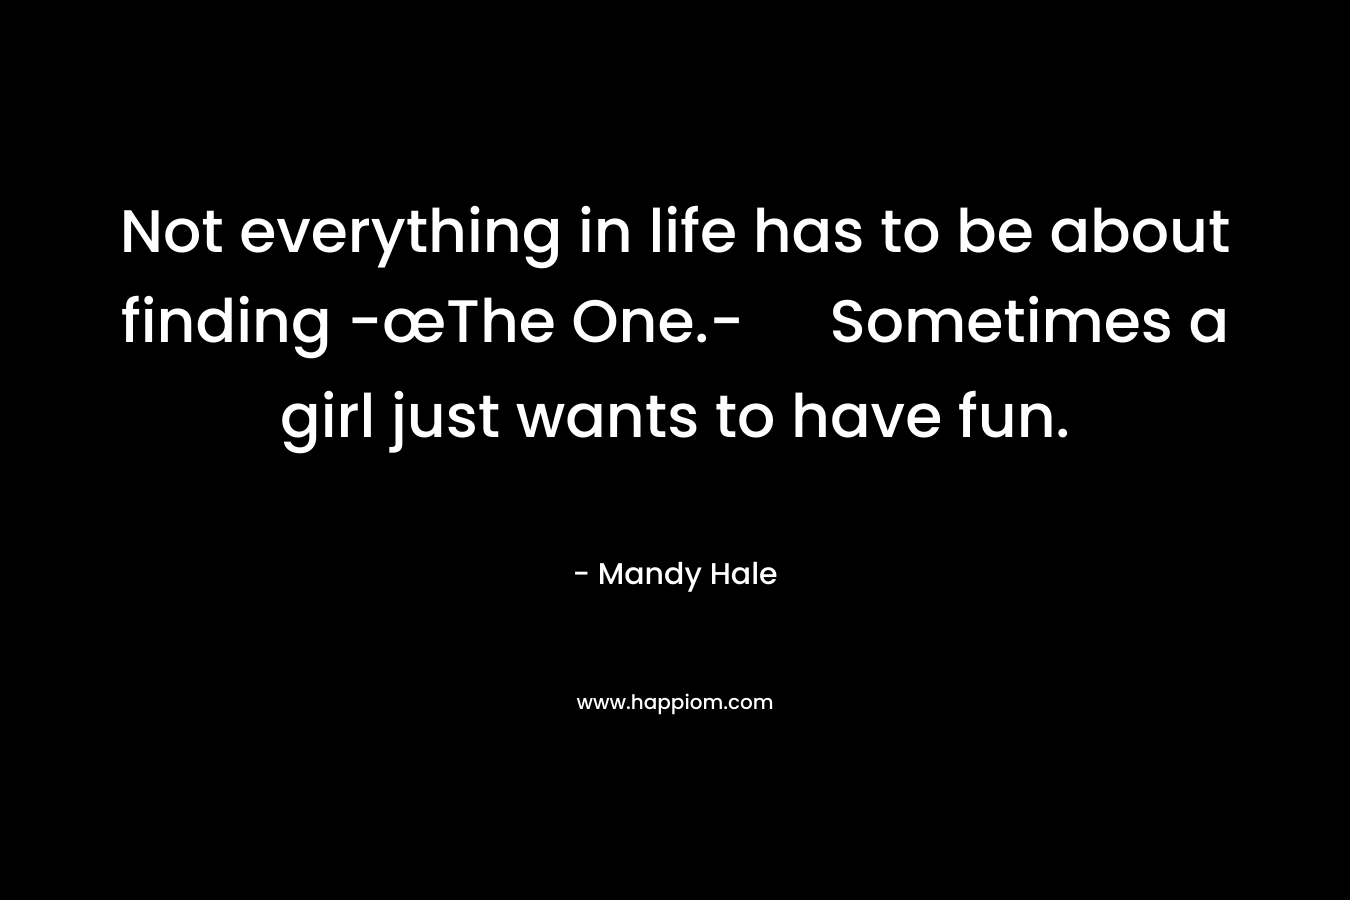 Not everything in life has to be about finding -œThe One.- Sometimes a girl just wants to have fun.